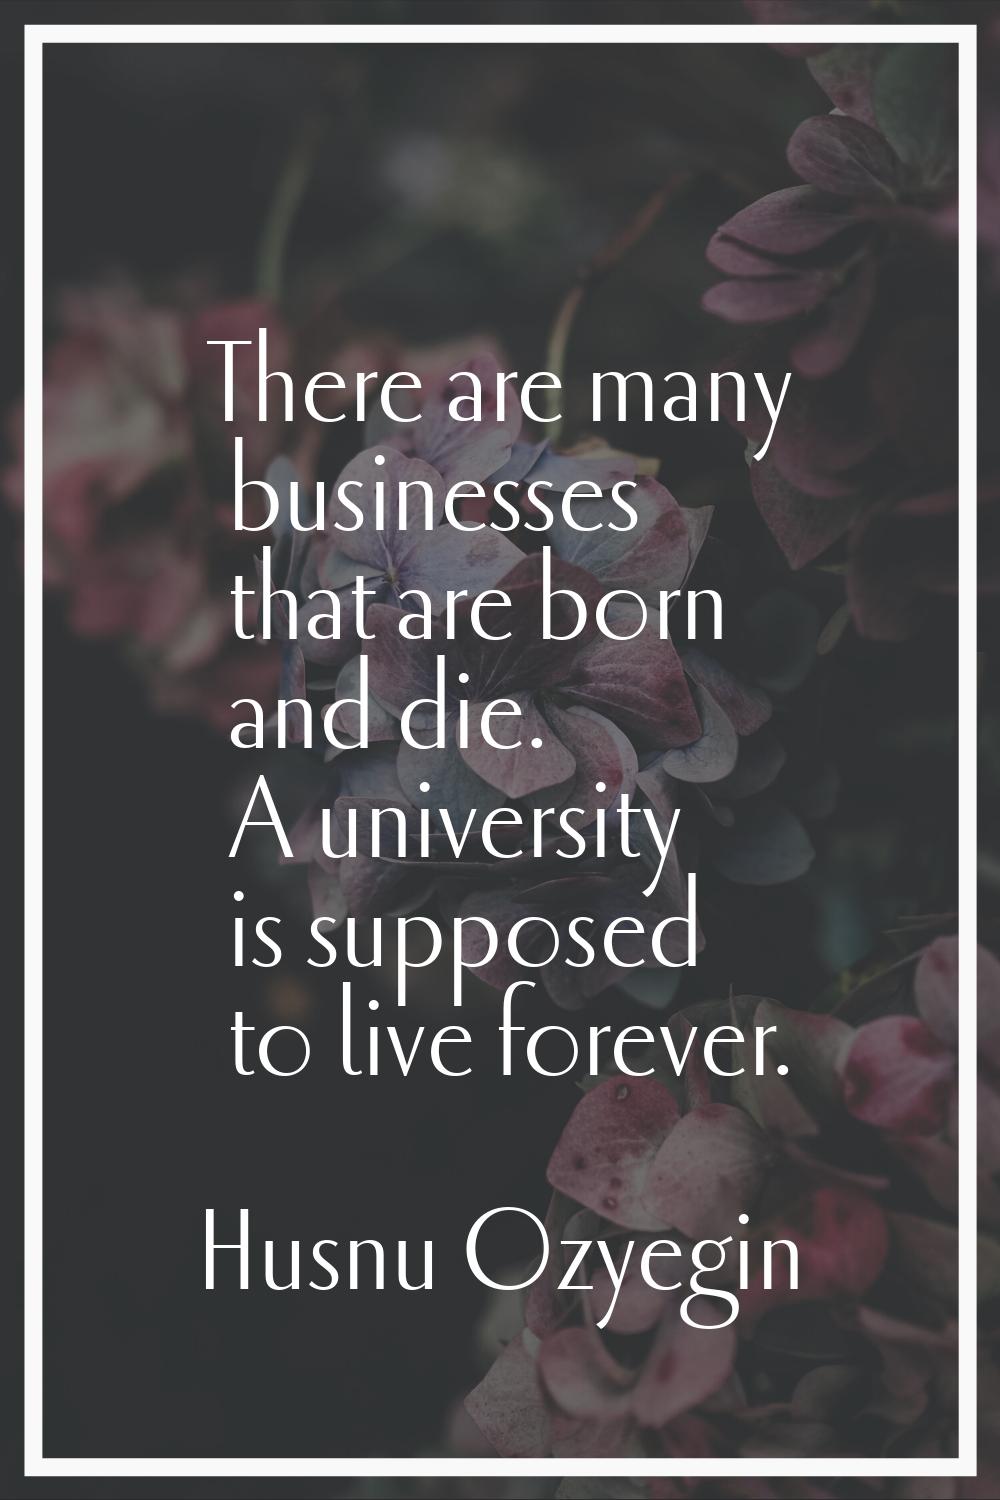 There are many businesses that are born and die. A university is supposed to live forever.